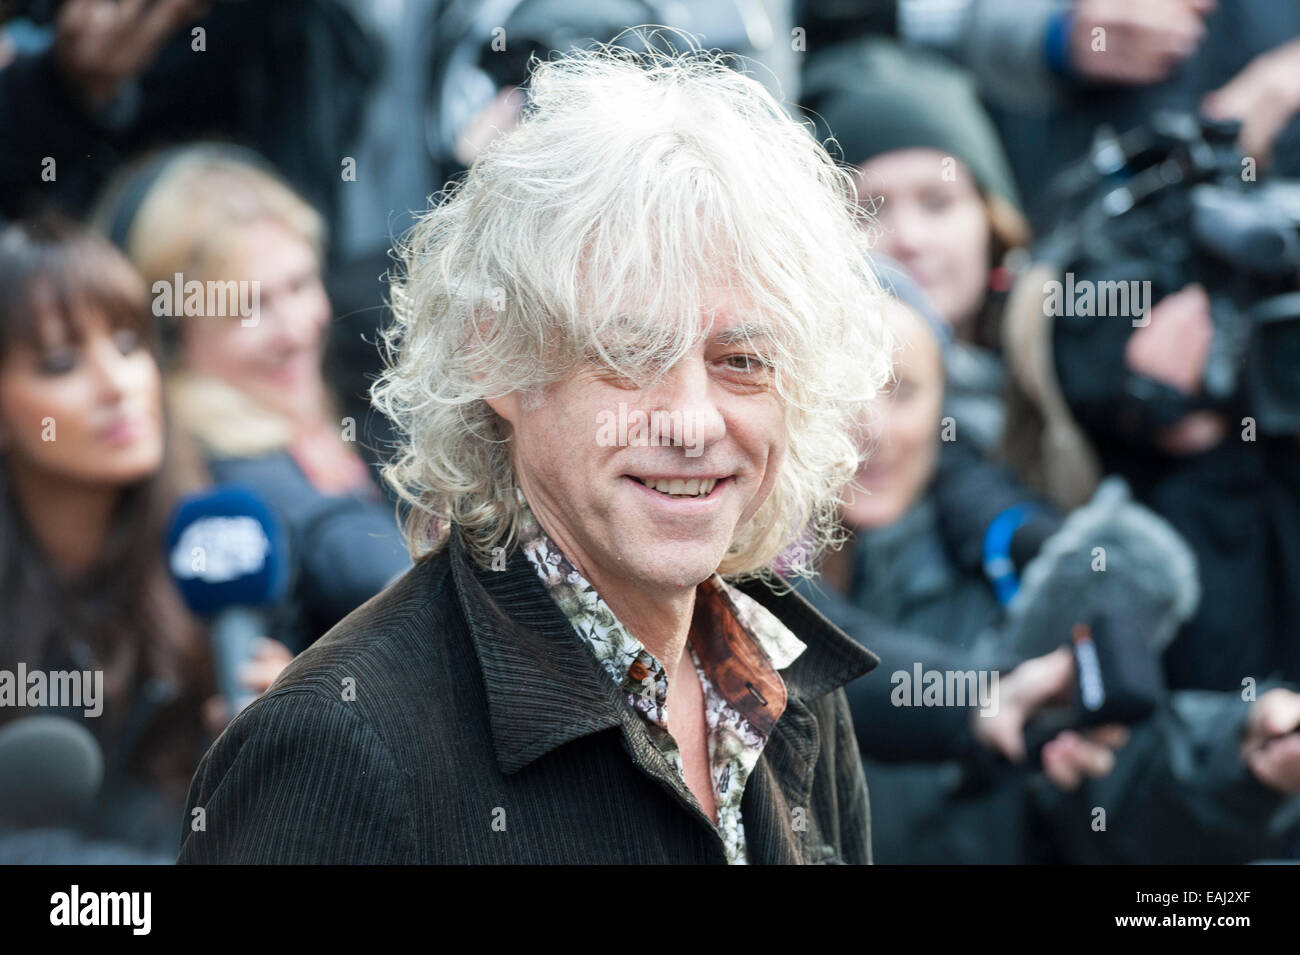 Basing Street, London, UK. 15th November 2014. Artists arrive at Sarm Studios in Notting Hill, west London, to record Band Aid. Pictured: Bob Geldof greets the crowd outside Sarm Studios. Credit:  Lee Thomas/Alamy Live News Stock Photo